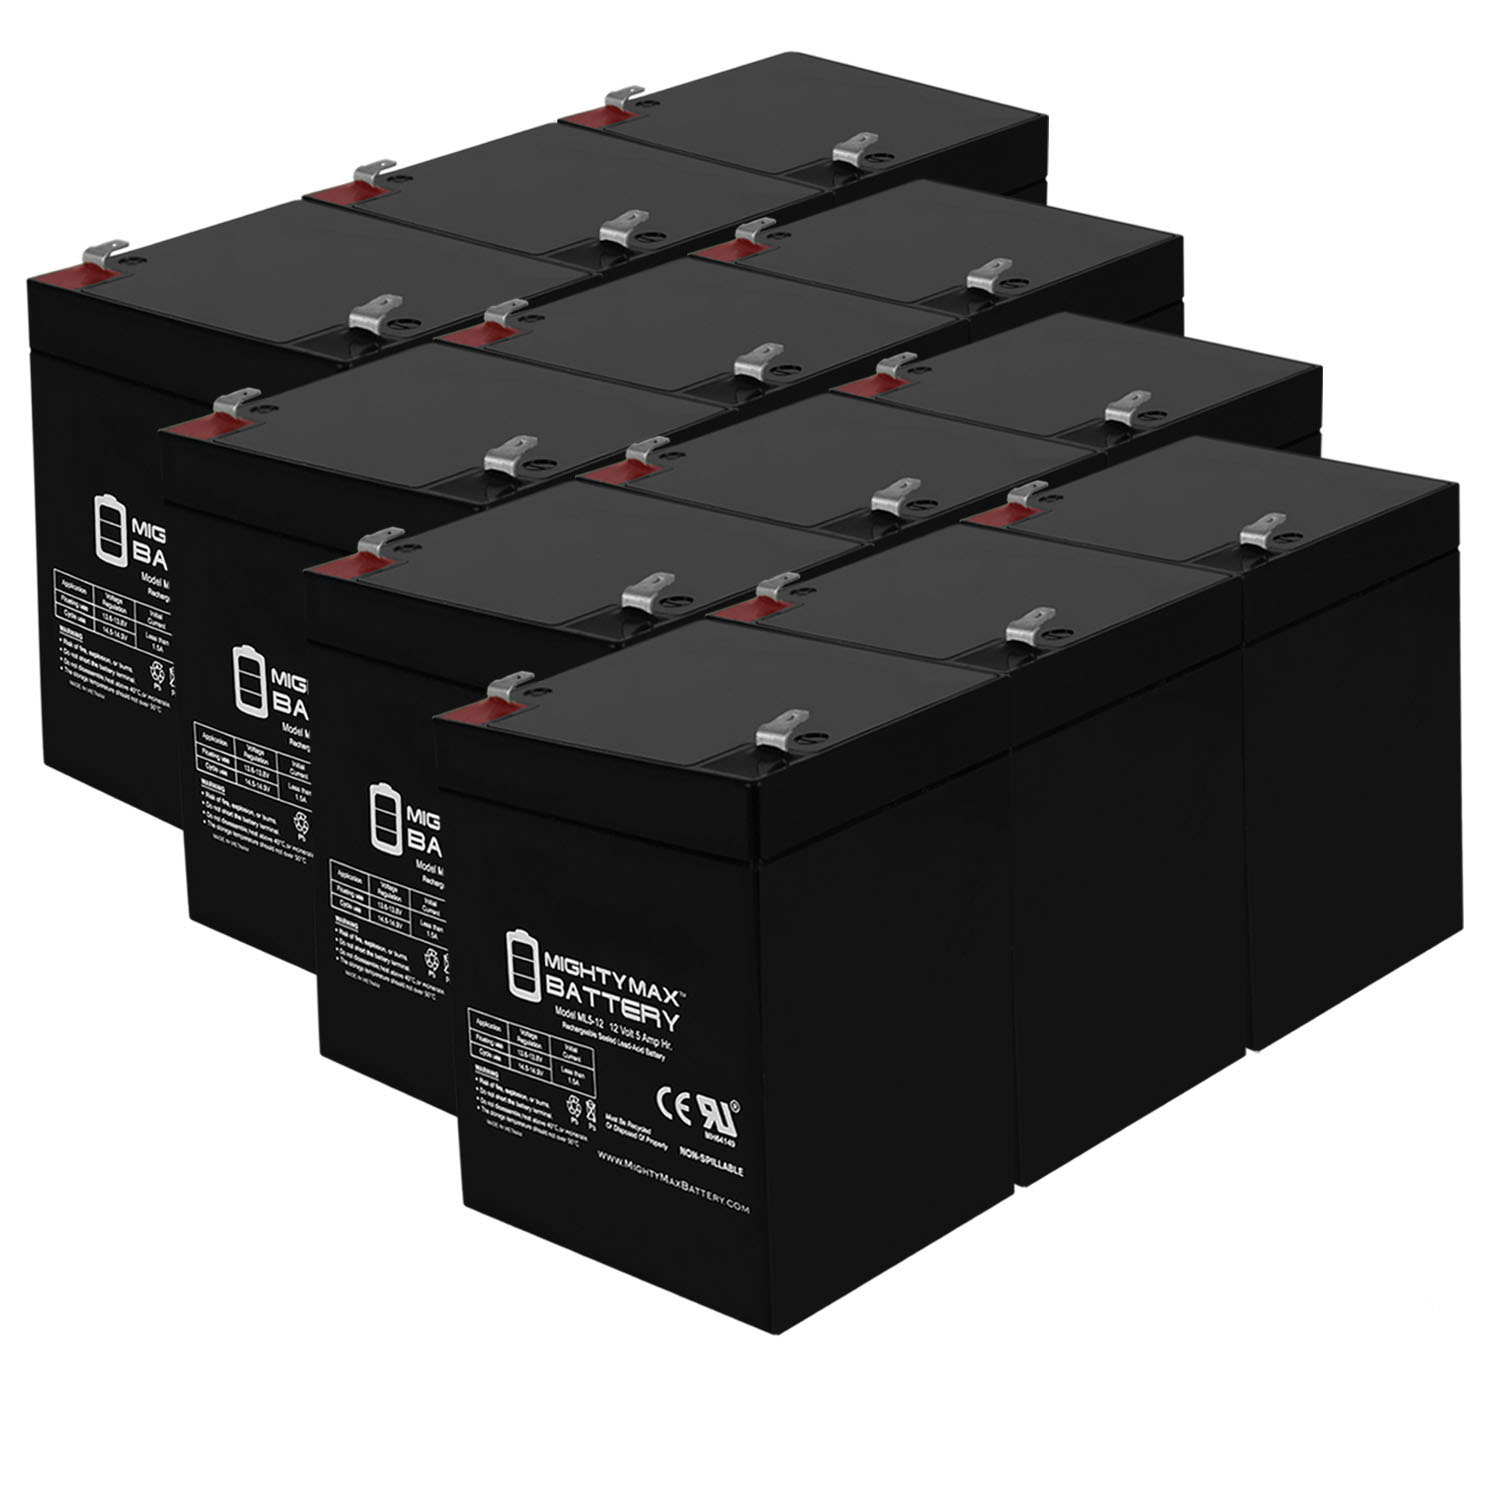 12V 5AH SLA Replacement Battery for Upsonic PC Might 25 - 12 Pack